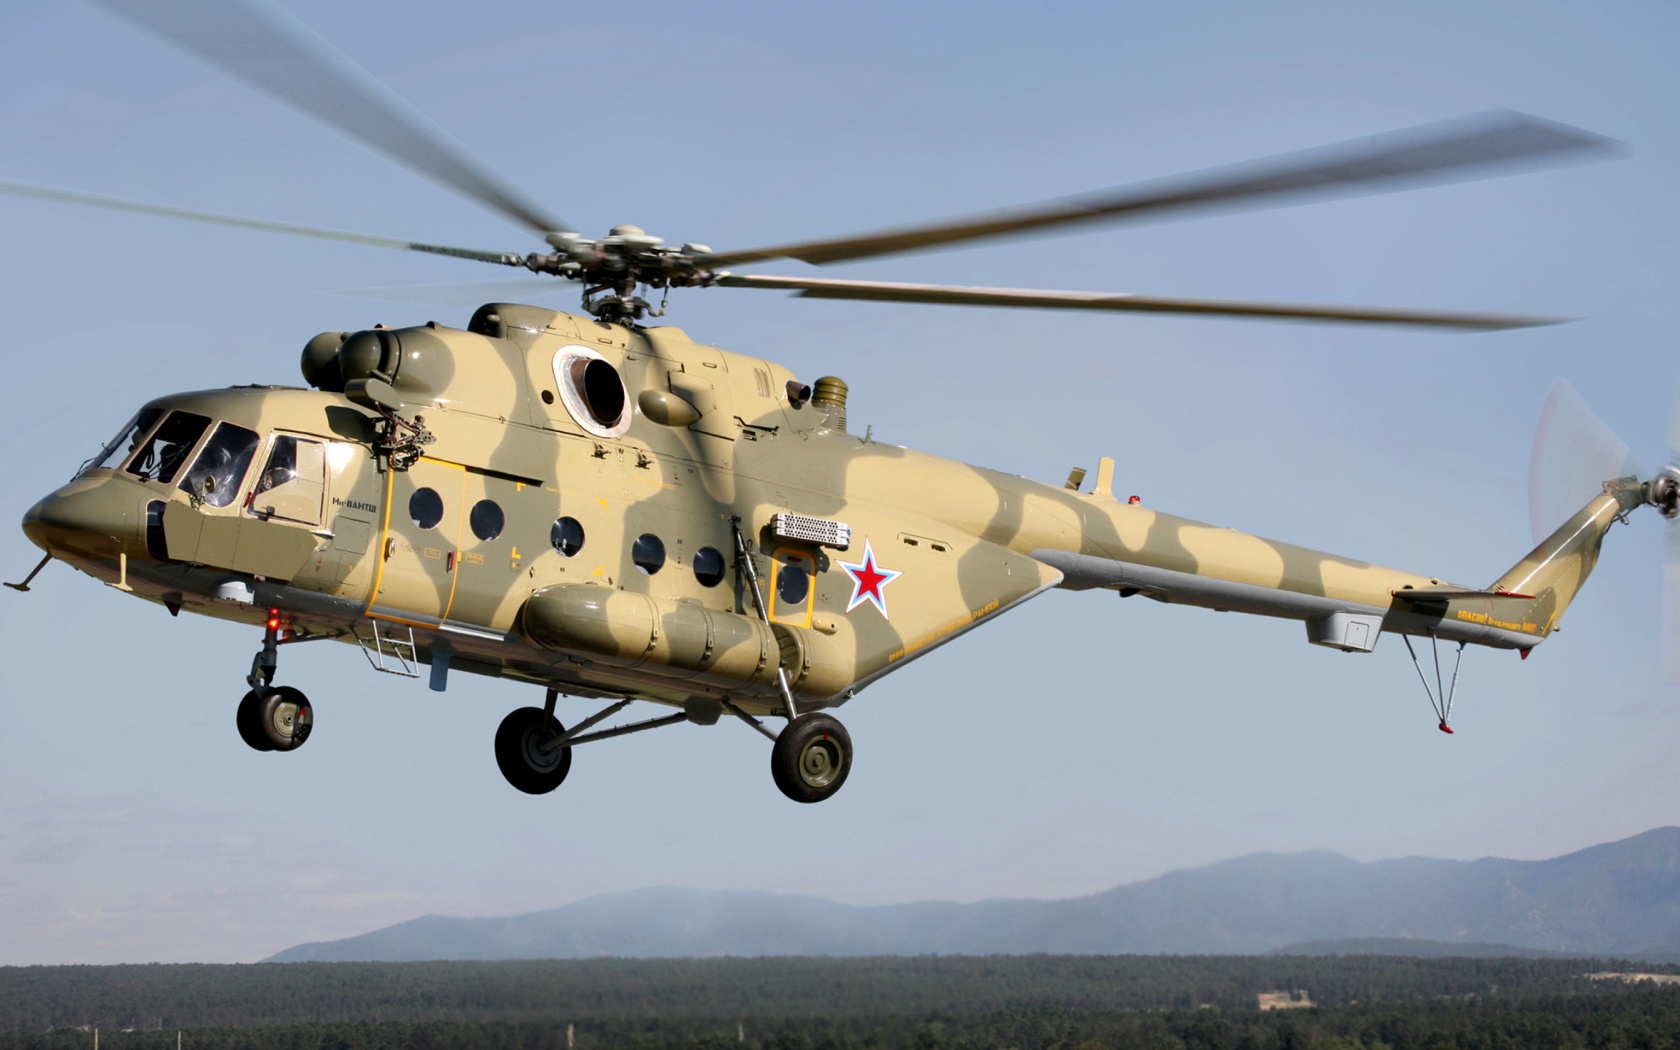 Mil Mi 17 Russian Helicopter wallpaper 1680x1050